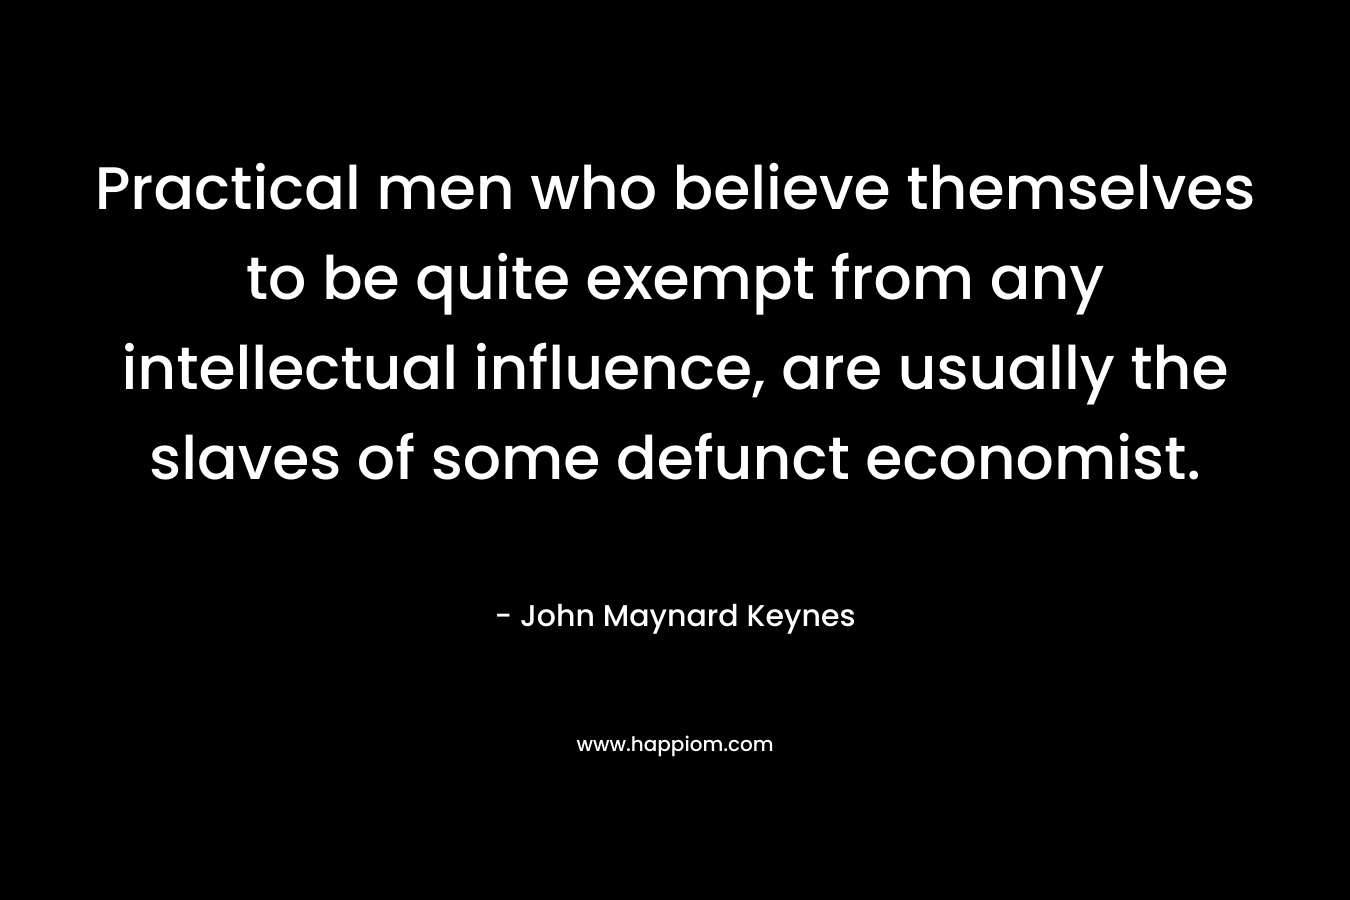 Practical men who believe themselves to be quite exempt from any intellectual influence, are usually the slaves of some defunct economist. – John Maynard Keynes